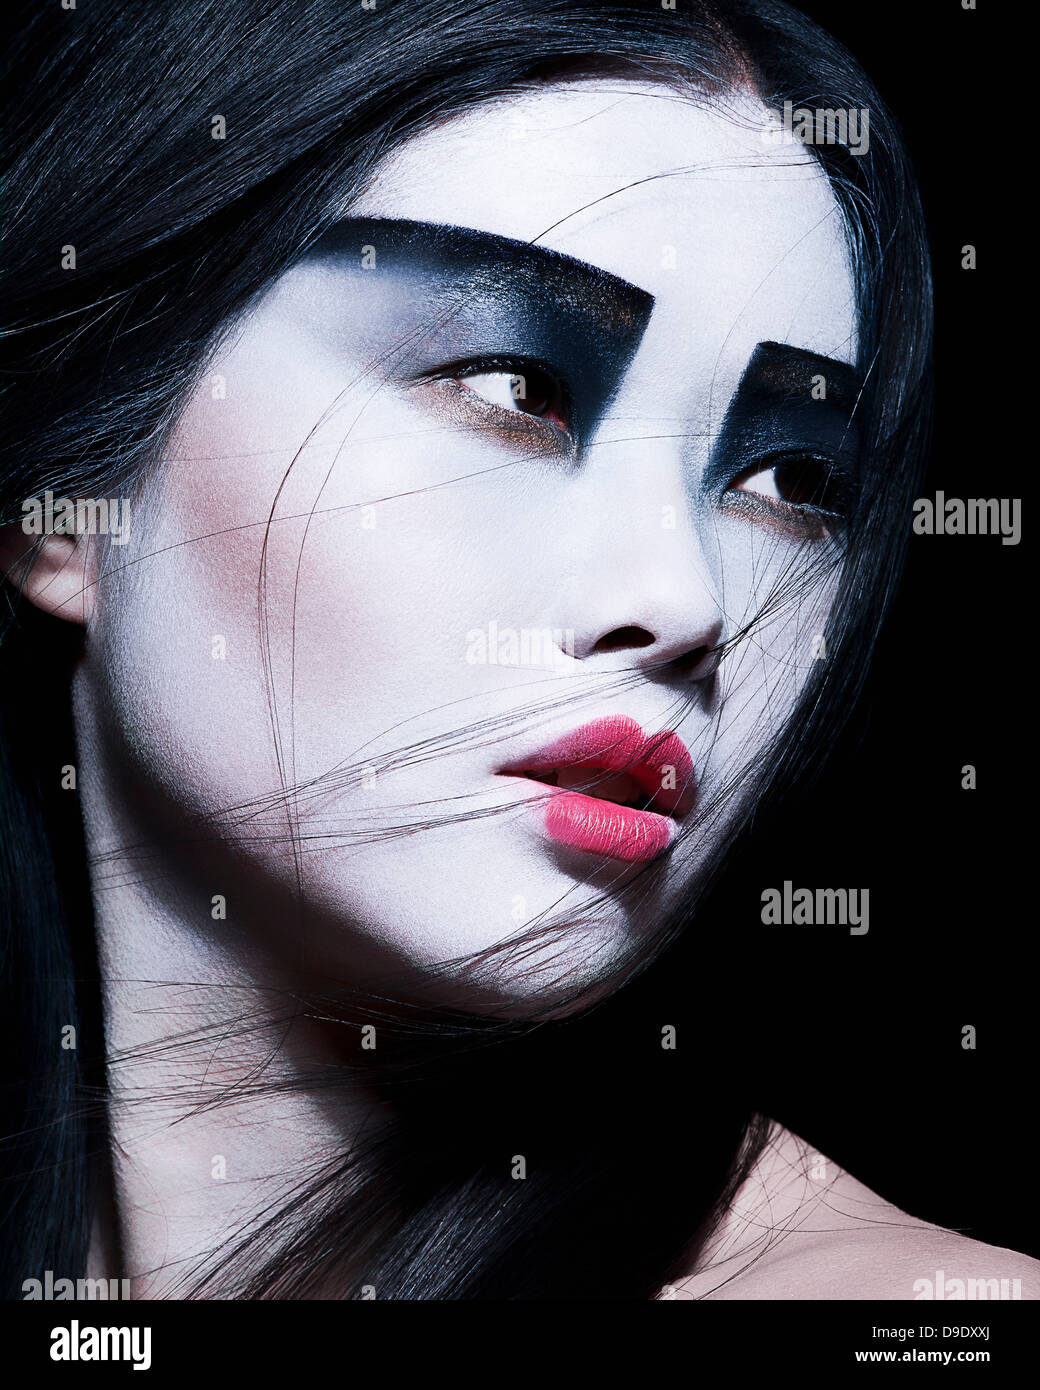 Dramatic portrait of young female with horror black stage makeup painted on  face and orange color dreadlocks hairstyle. Studio shot on blue background  Stock Photo - Alamy